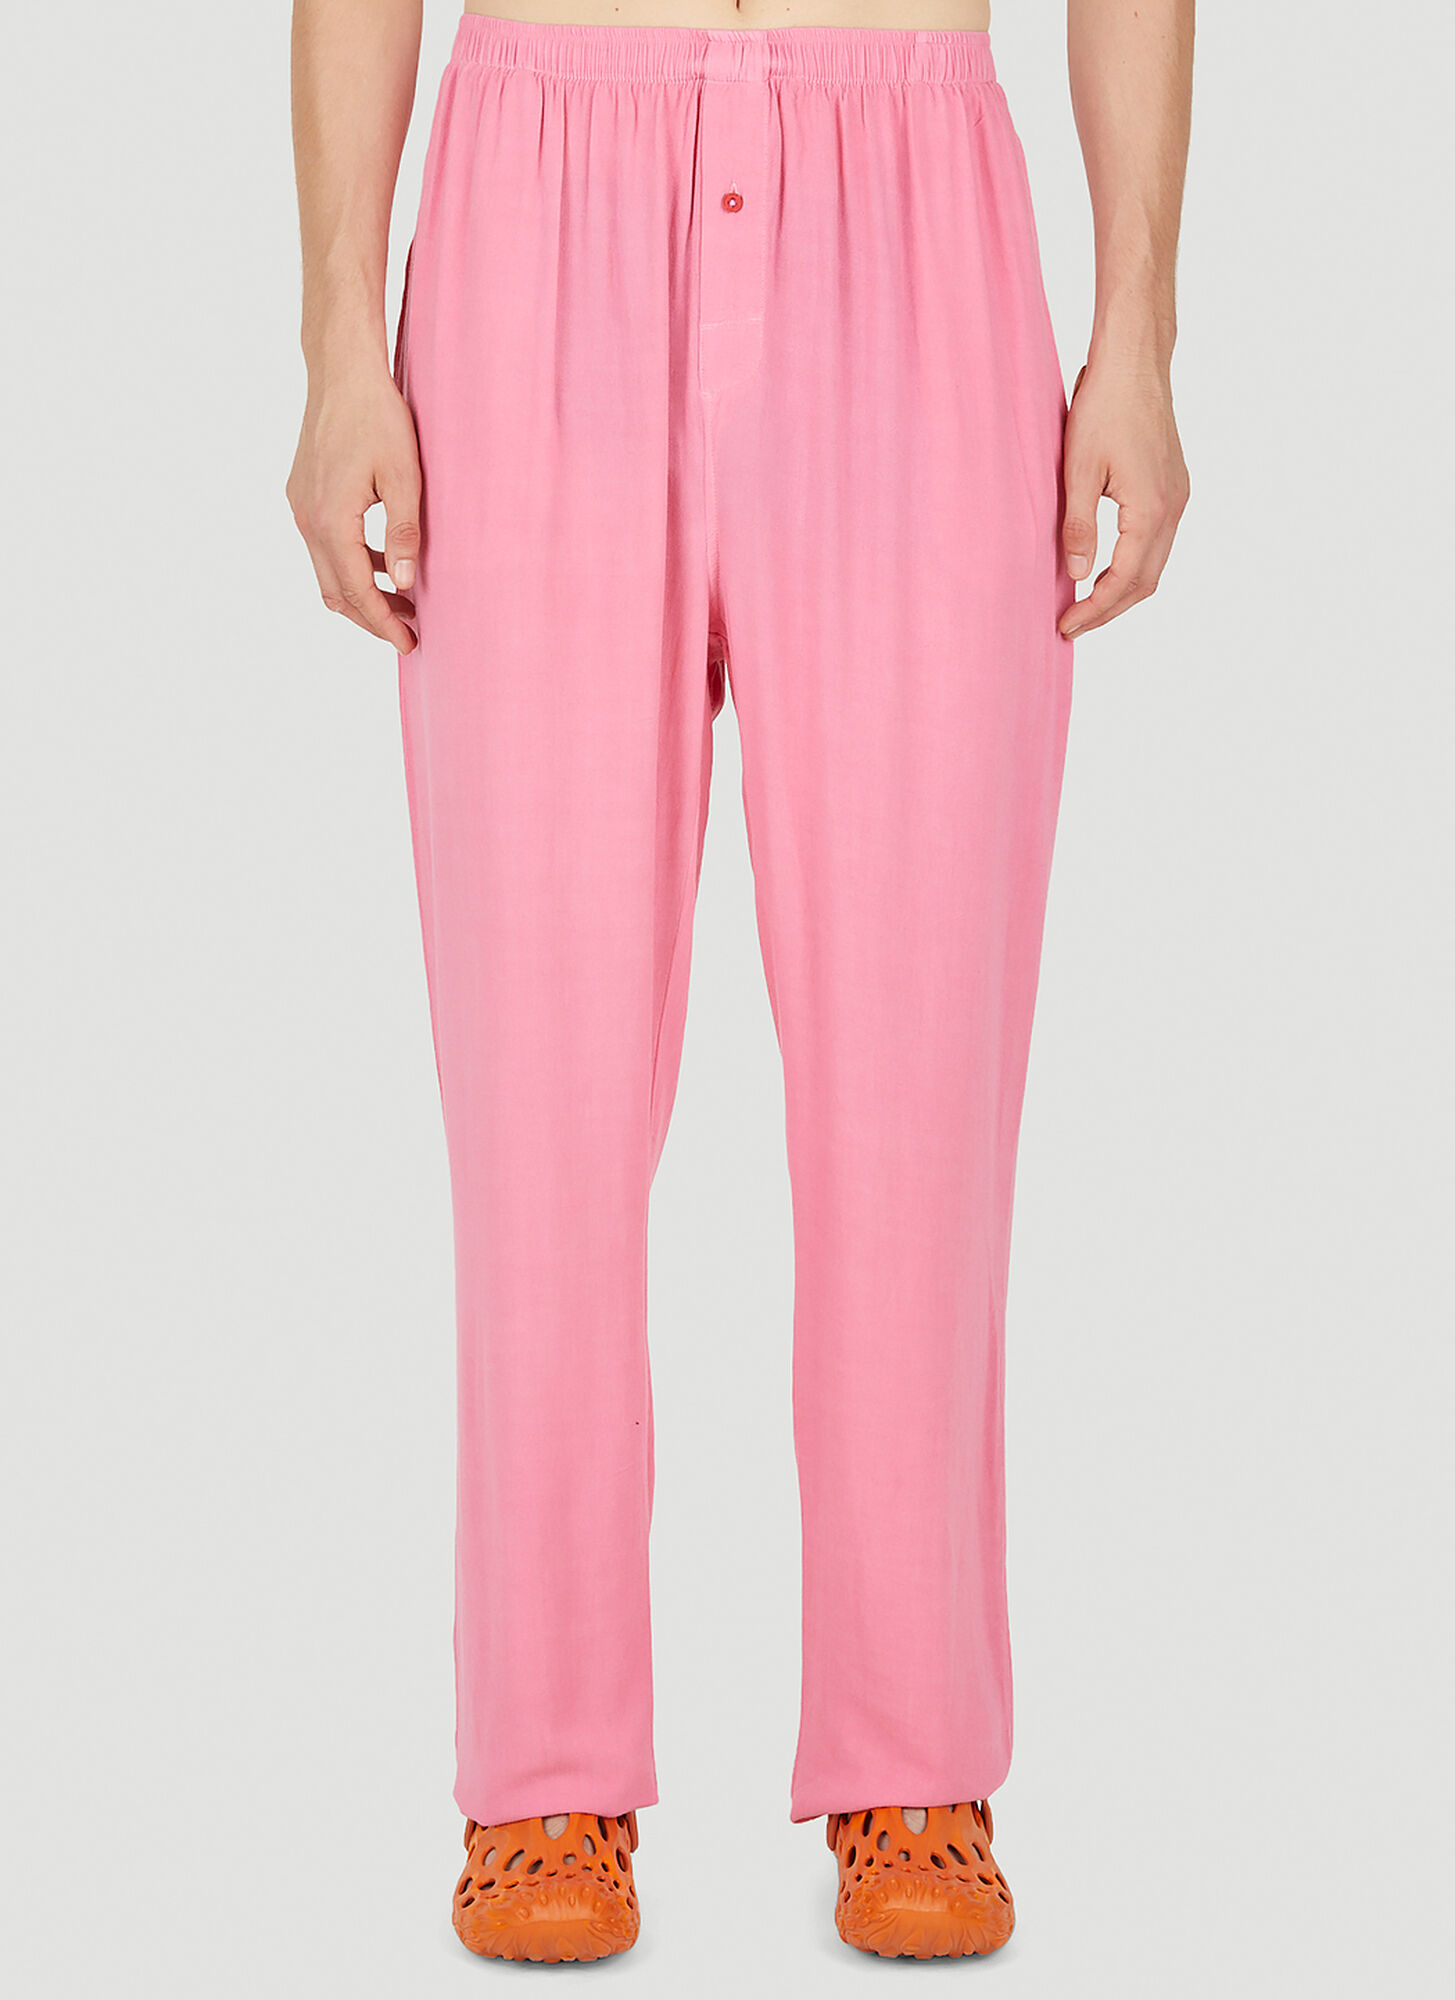 Gallery Dept. Chateau Josue Pants Male Pink